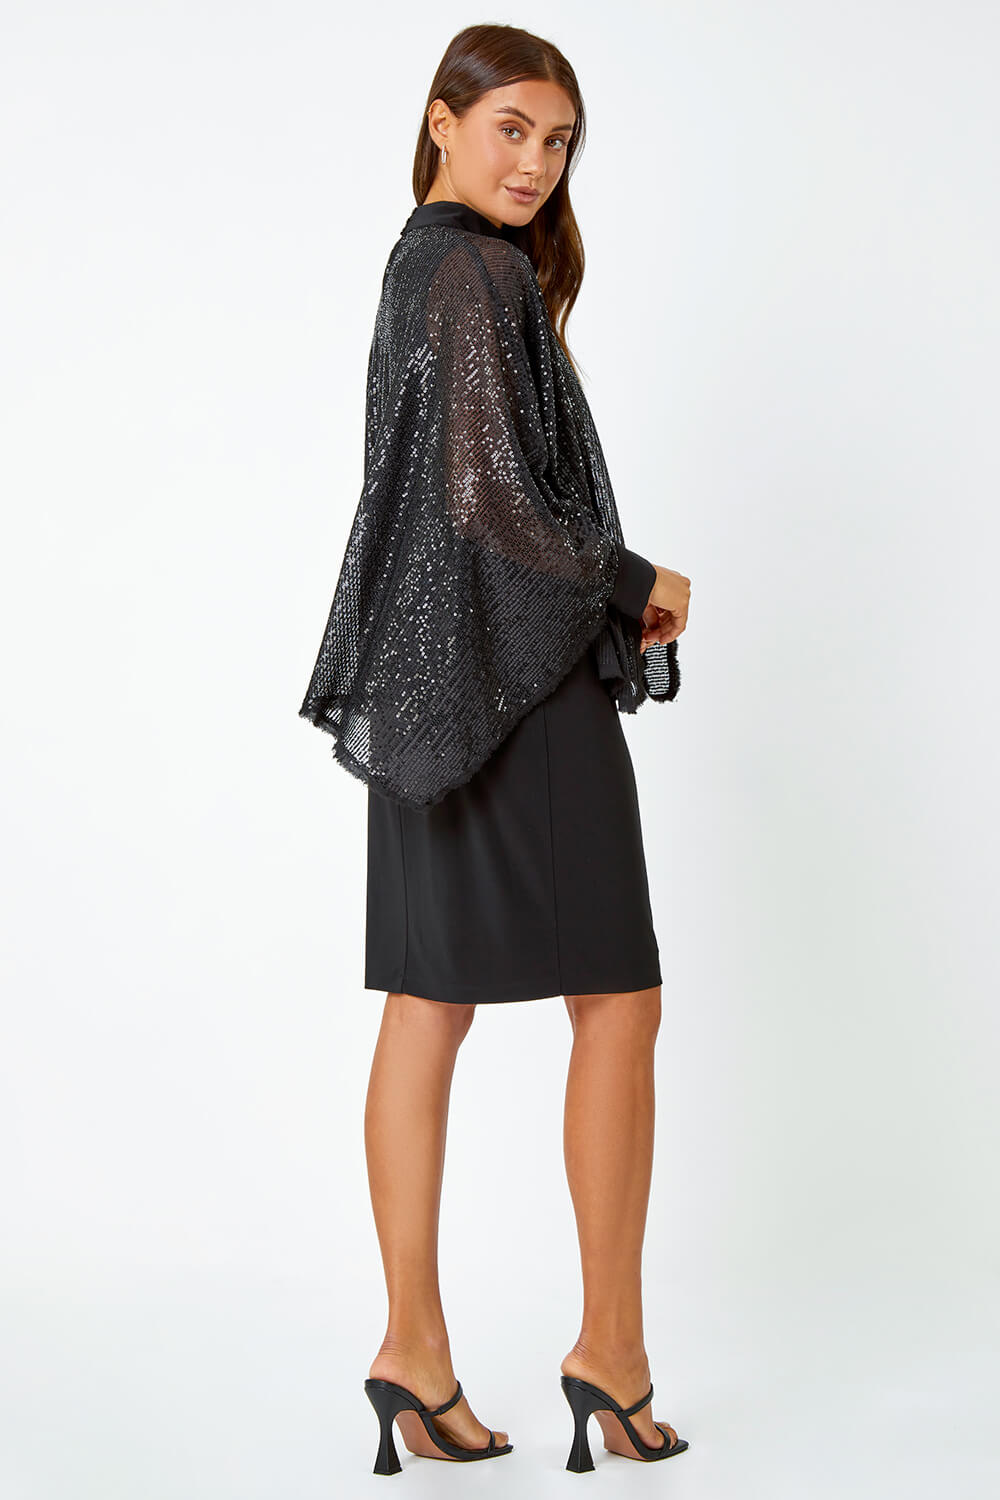 Black Sequin Overlay Bodycon Stretch Dress, Image 3 of 5